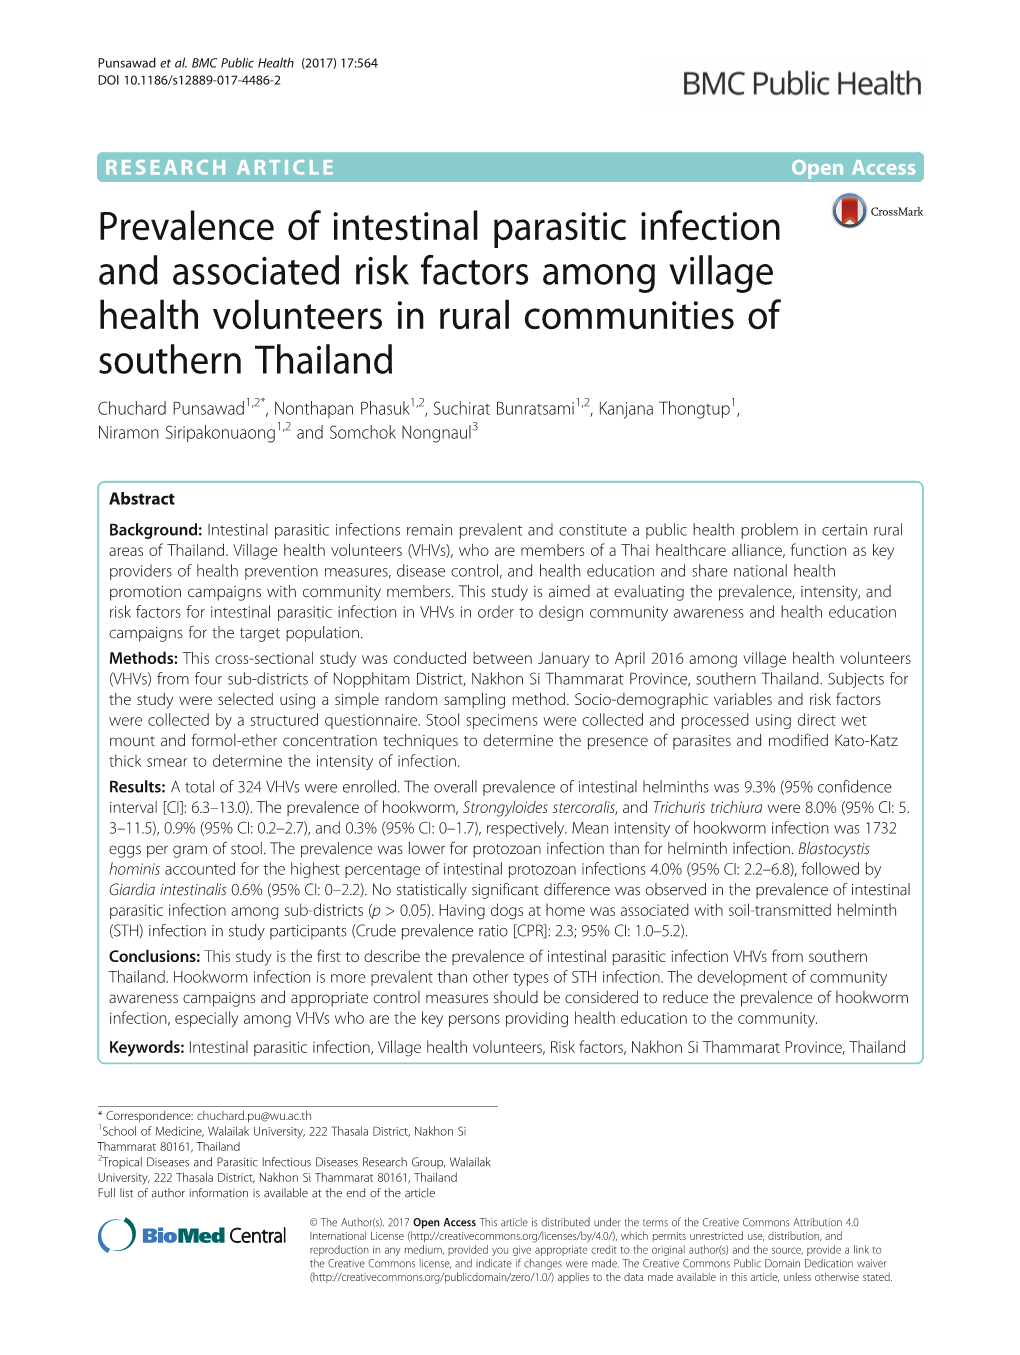 Prevalence of Intestinal Parasitic Infection and Associated Risk Factors